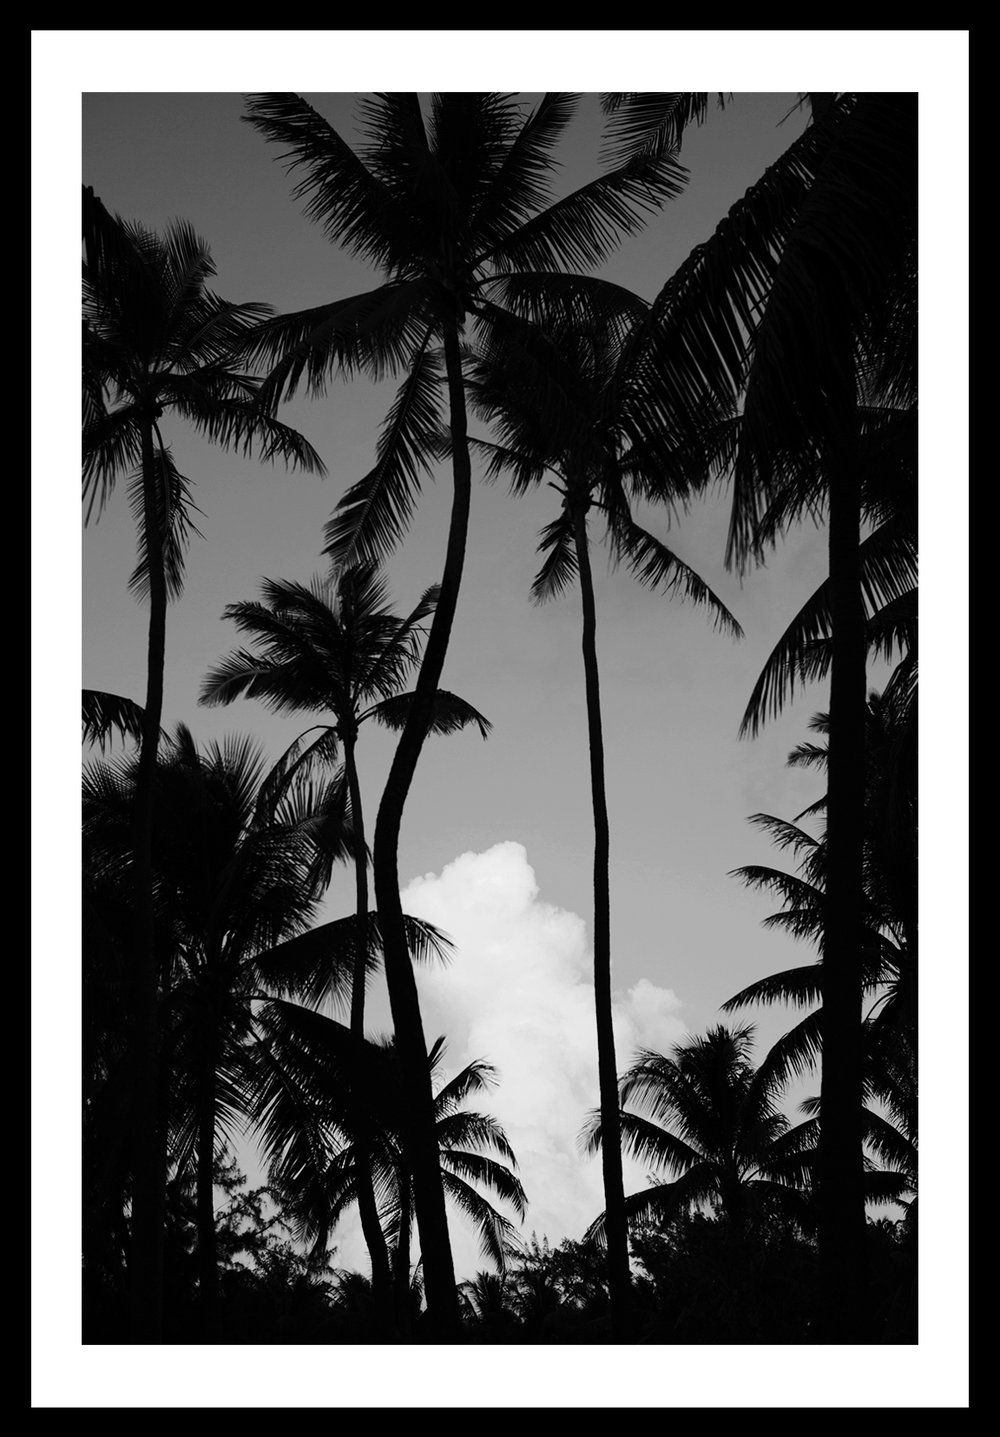 Image of Clouds and Trees. Taha'a Island, French Polynesia. 2012